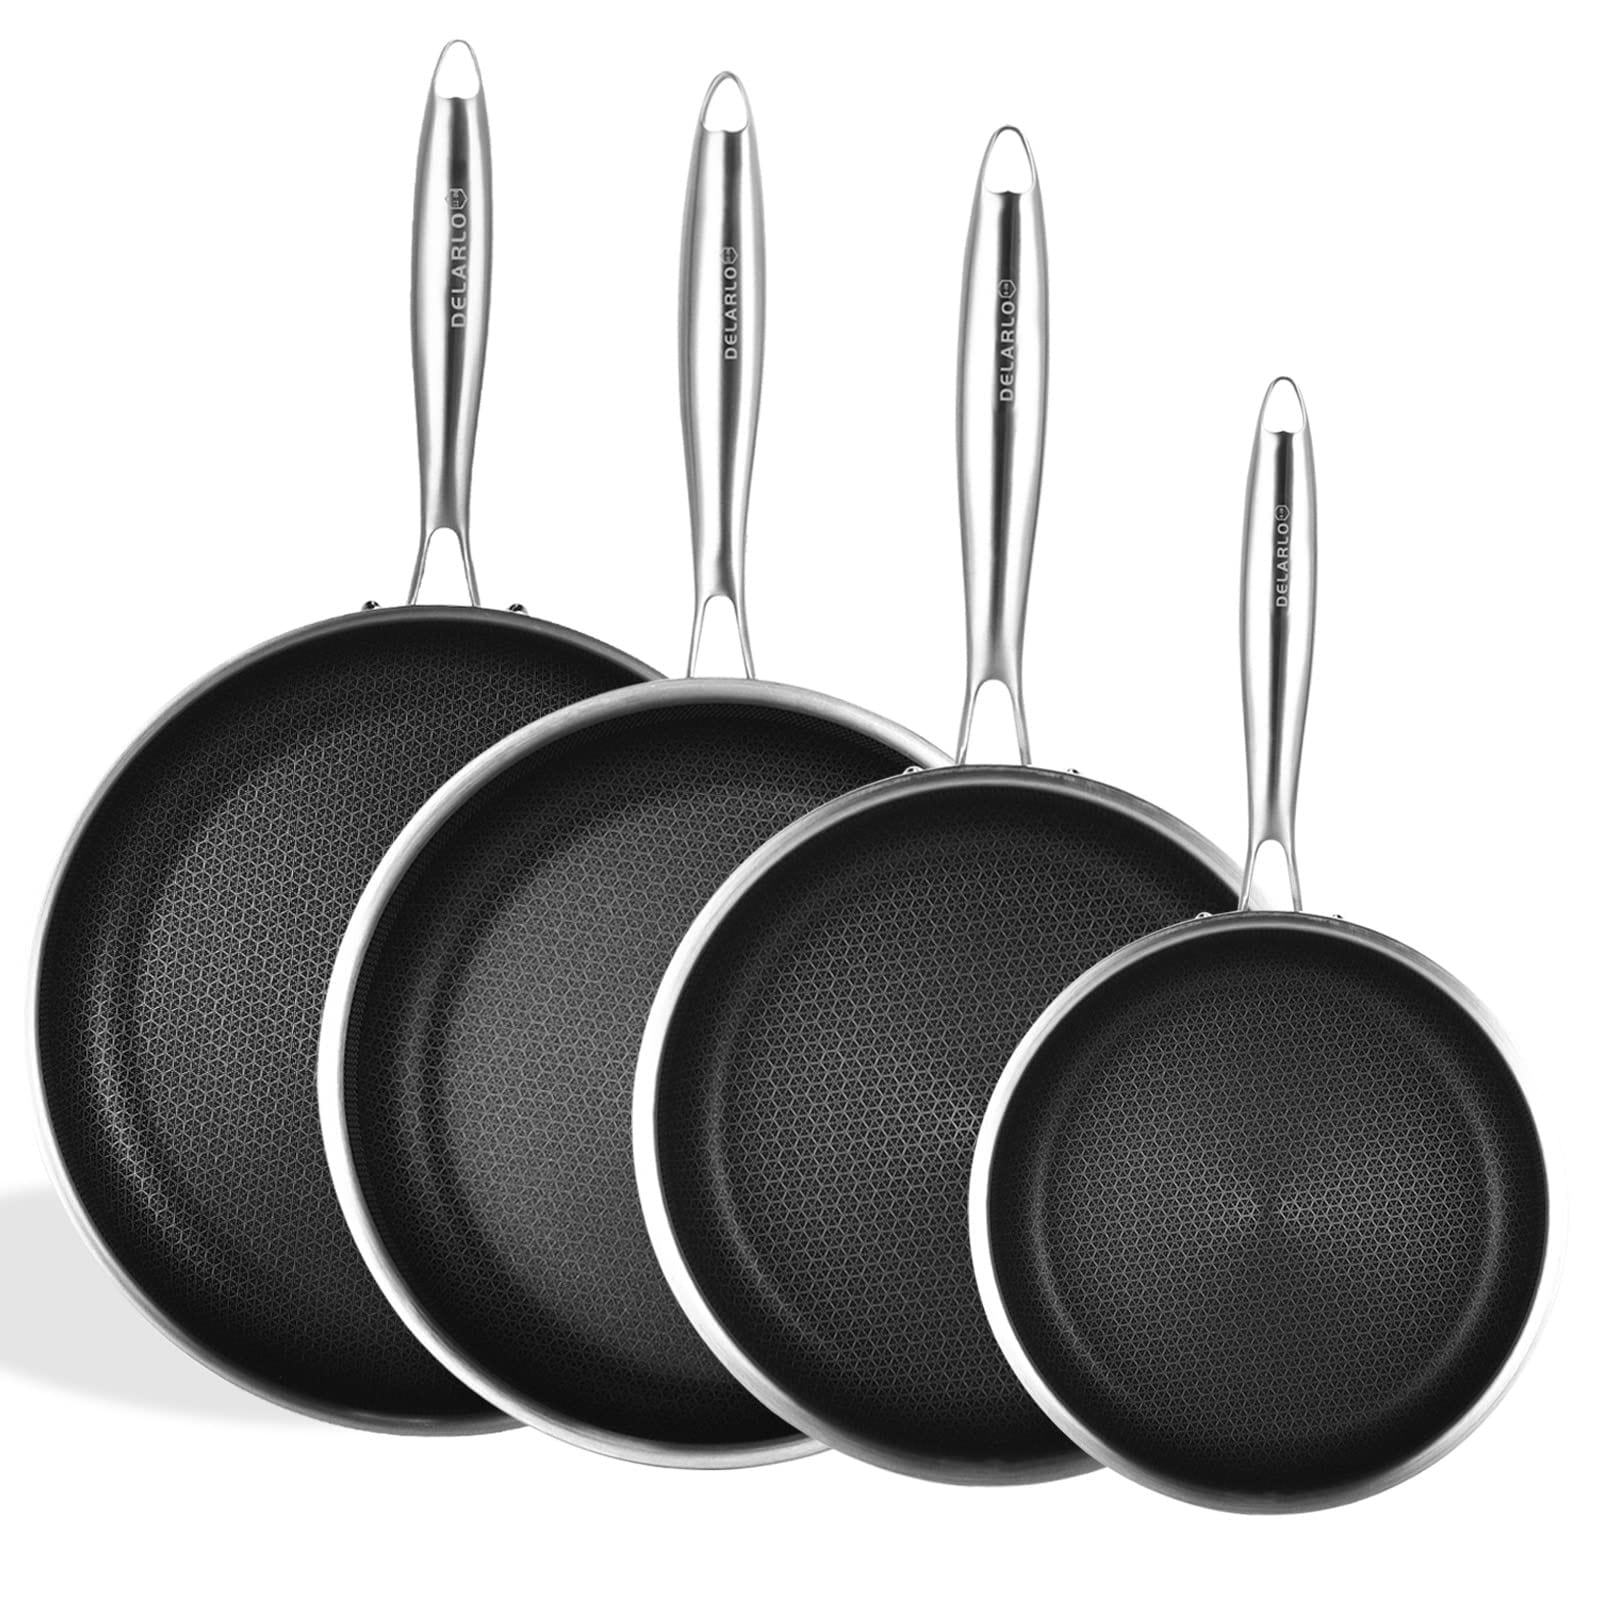 https://ak1.ostkcdn.com/images/products/is/images/direct/38a029f032c9eba6fe681a30acd1d5f94a6e0bab/Stainless-Steel-Frying-Pan-Set-Cooking-Pan-Skillets-Oven-Safe-Induction-Skillet%2C-Pots-and-Pans-Set.jpg